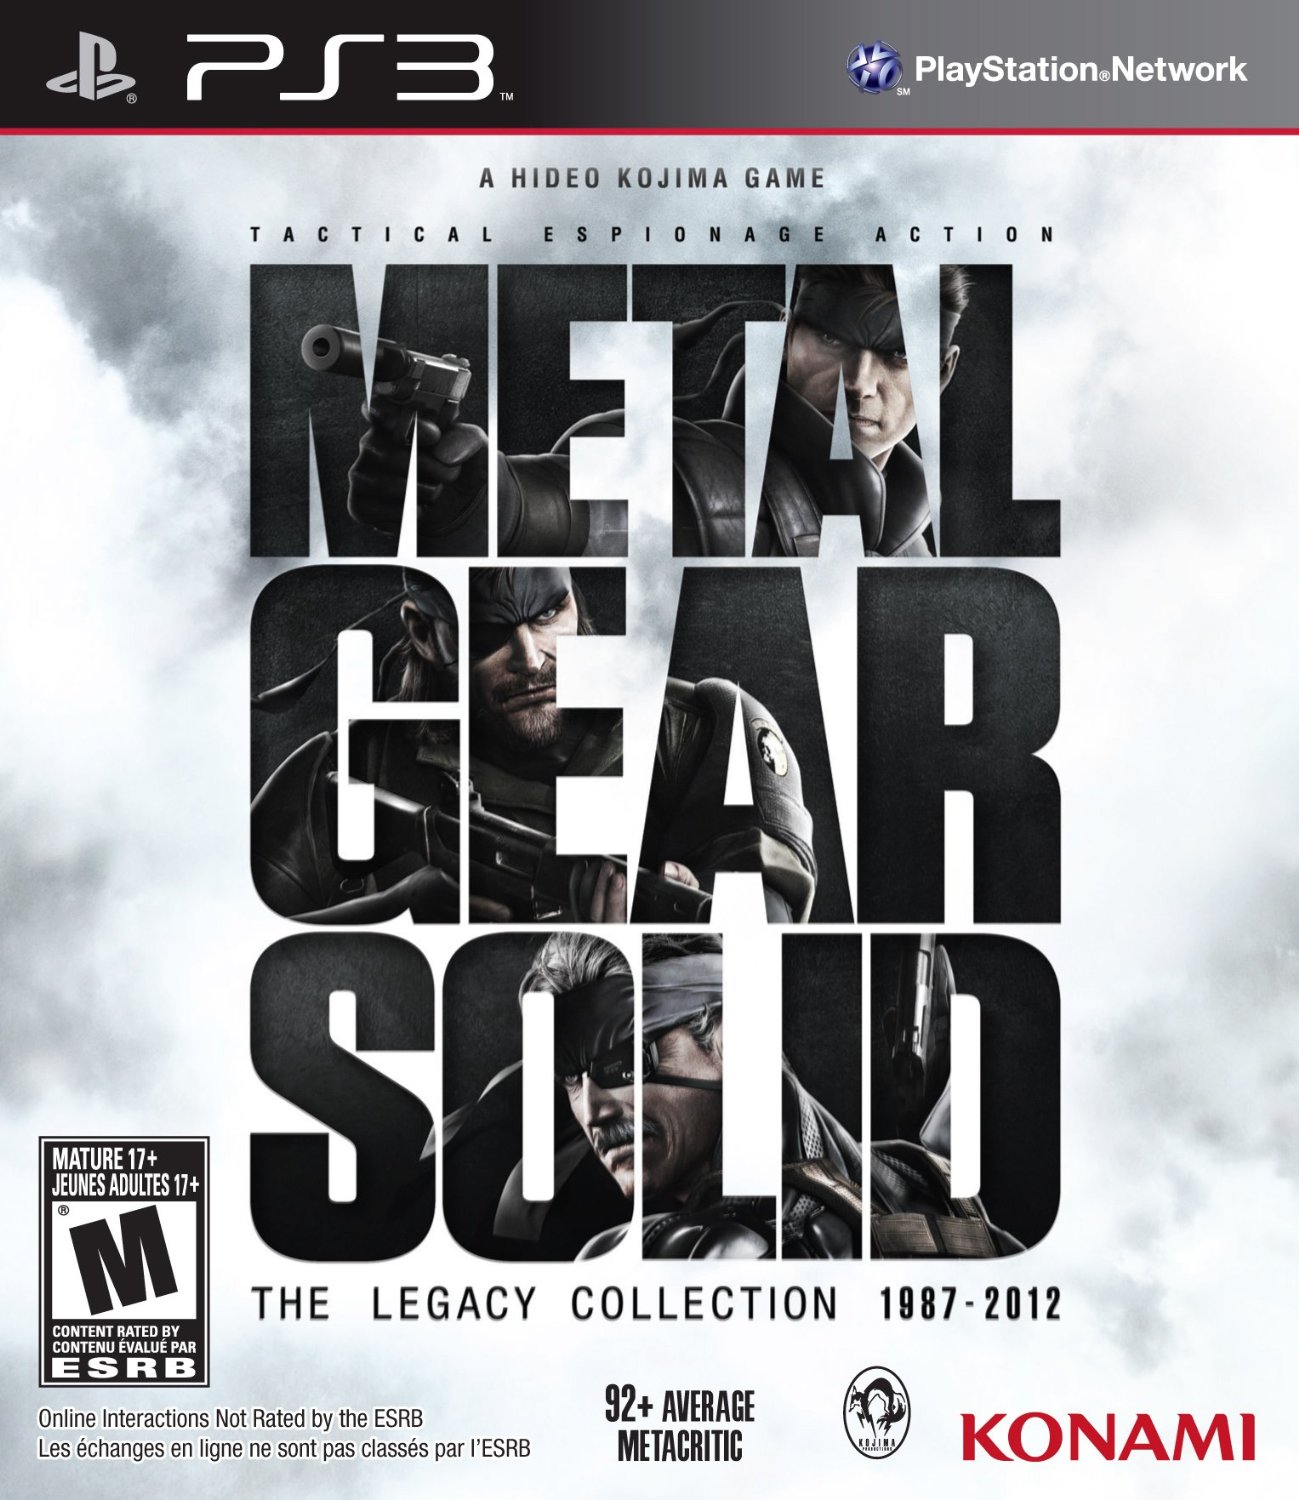 metal gear solid hd collection xbox one